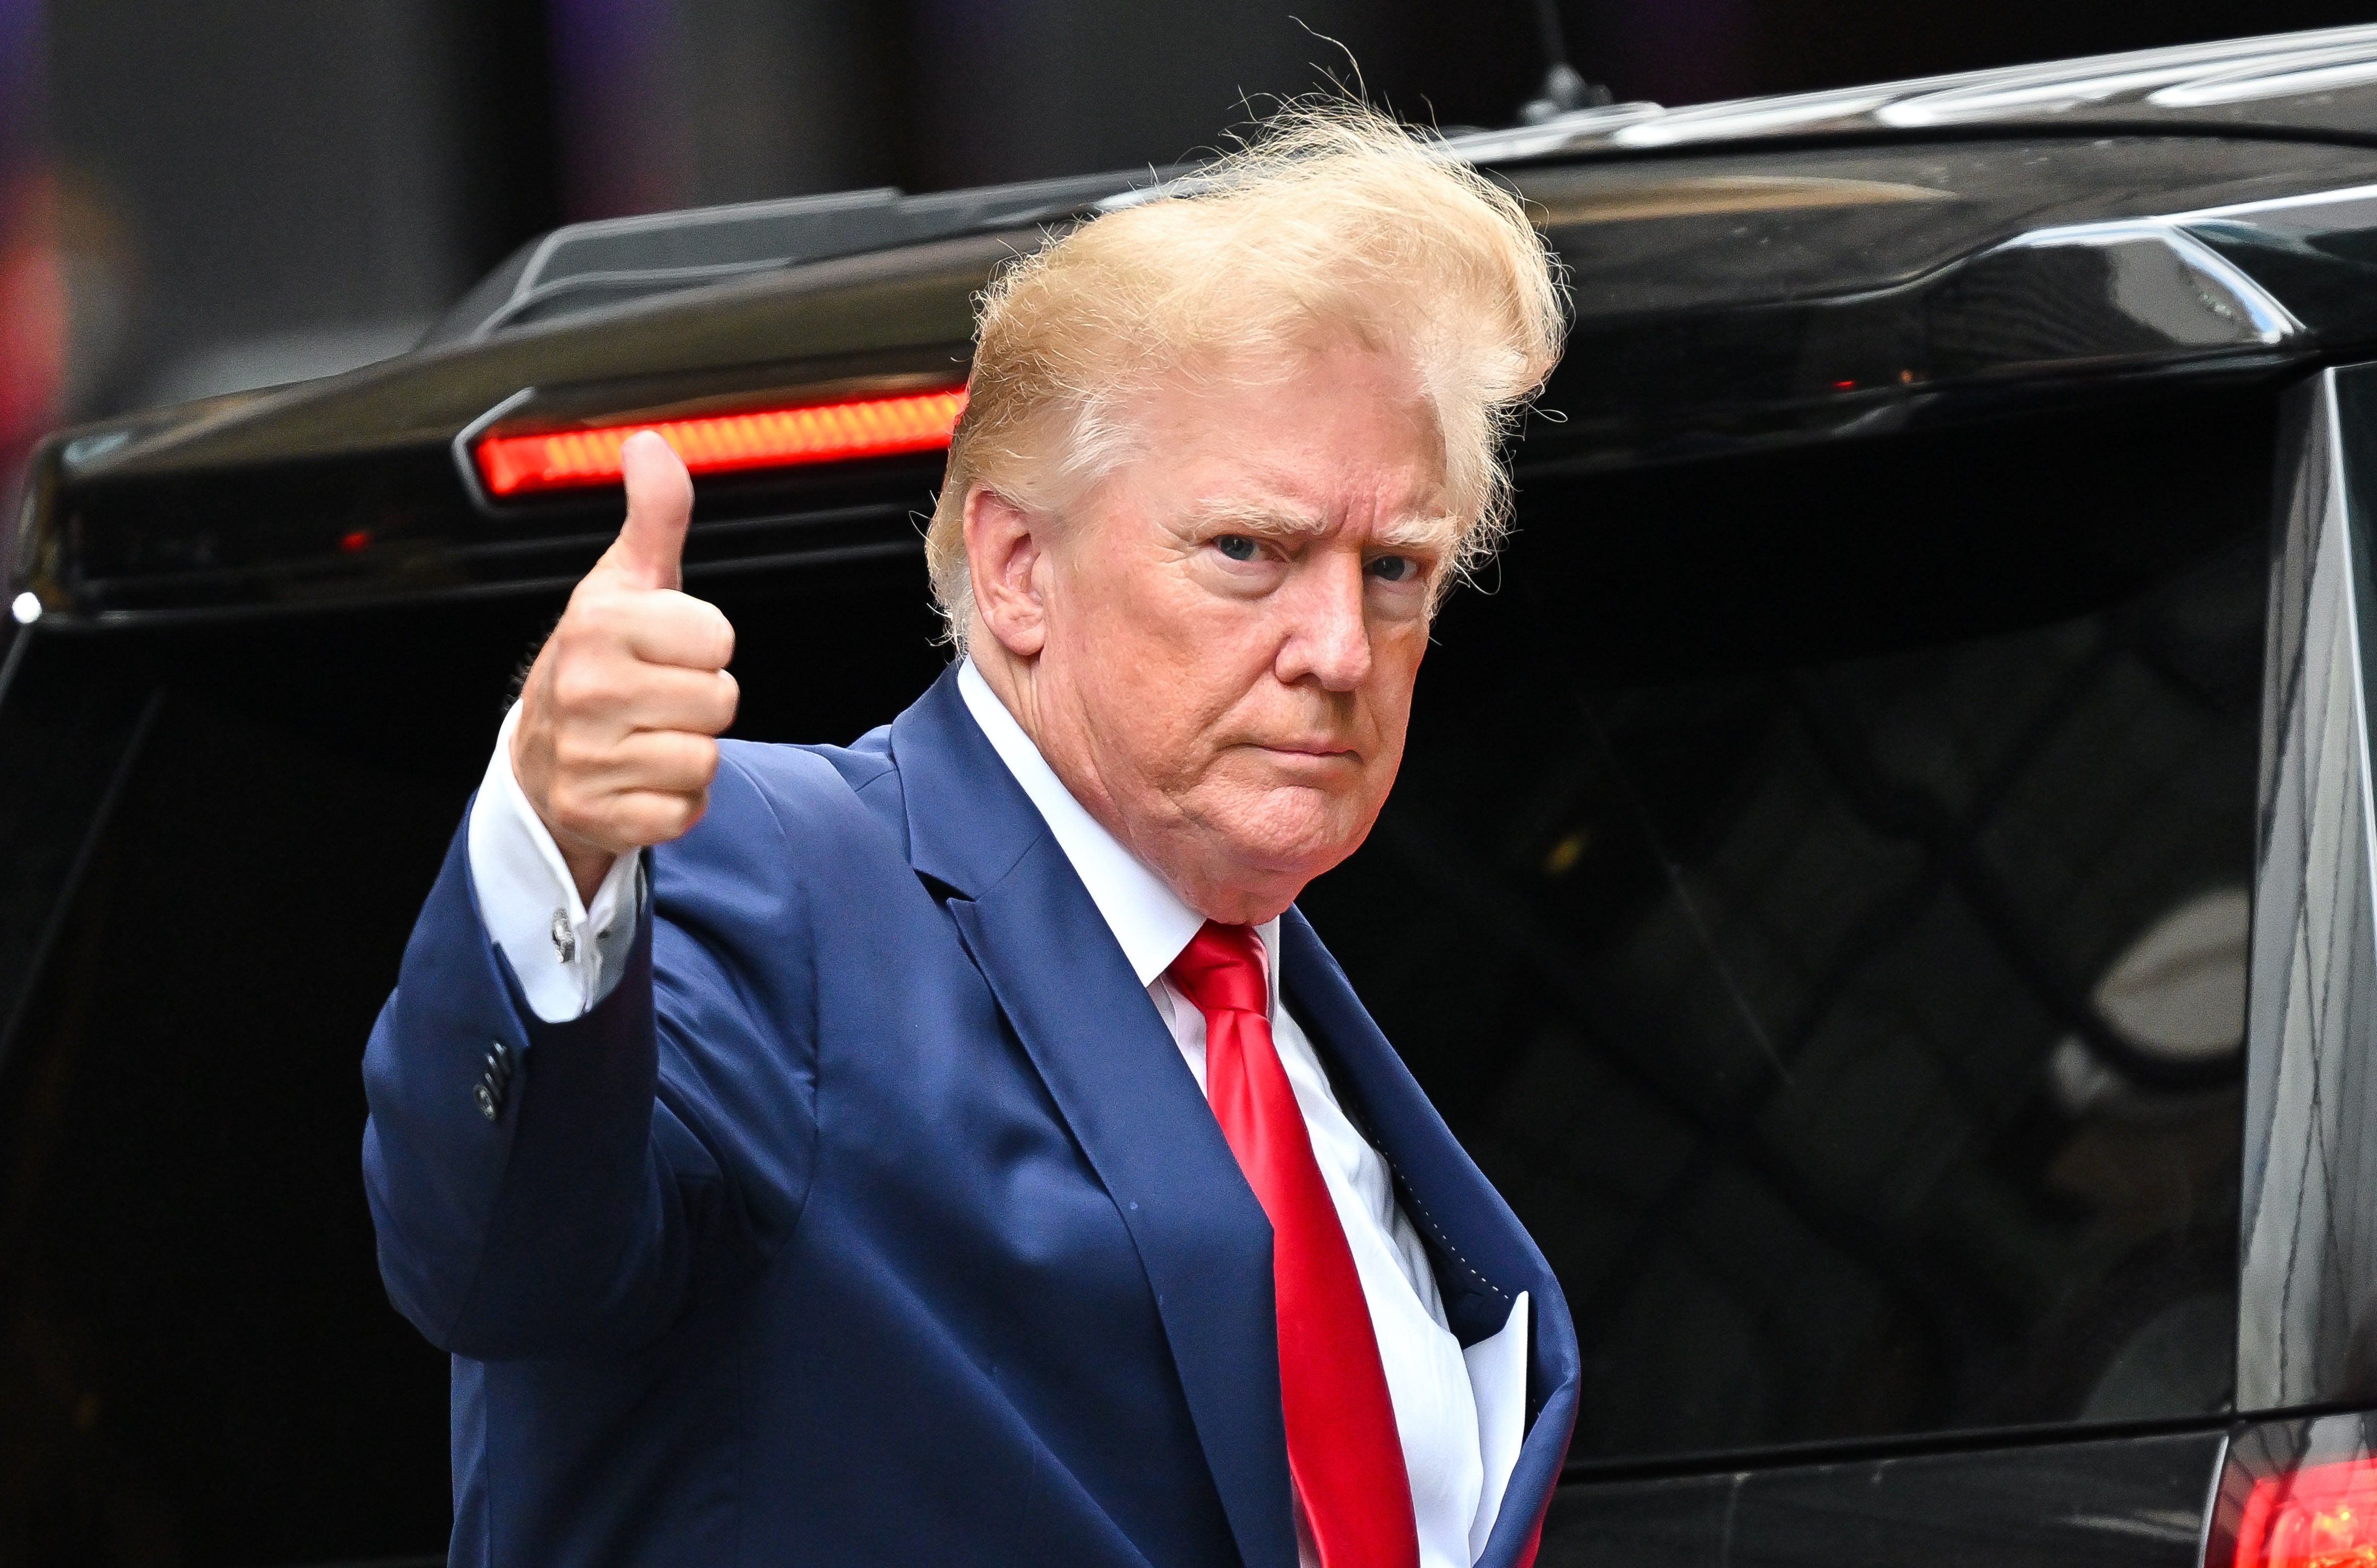  Former U.S. President Donald Trump leaves Trump Tower to meet with New York Attorney General Letitia James for a civil investigation on August 10, 2022 in New York City.